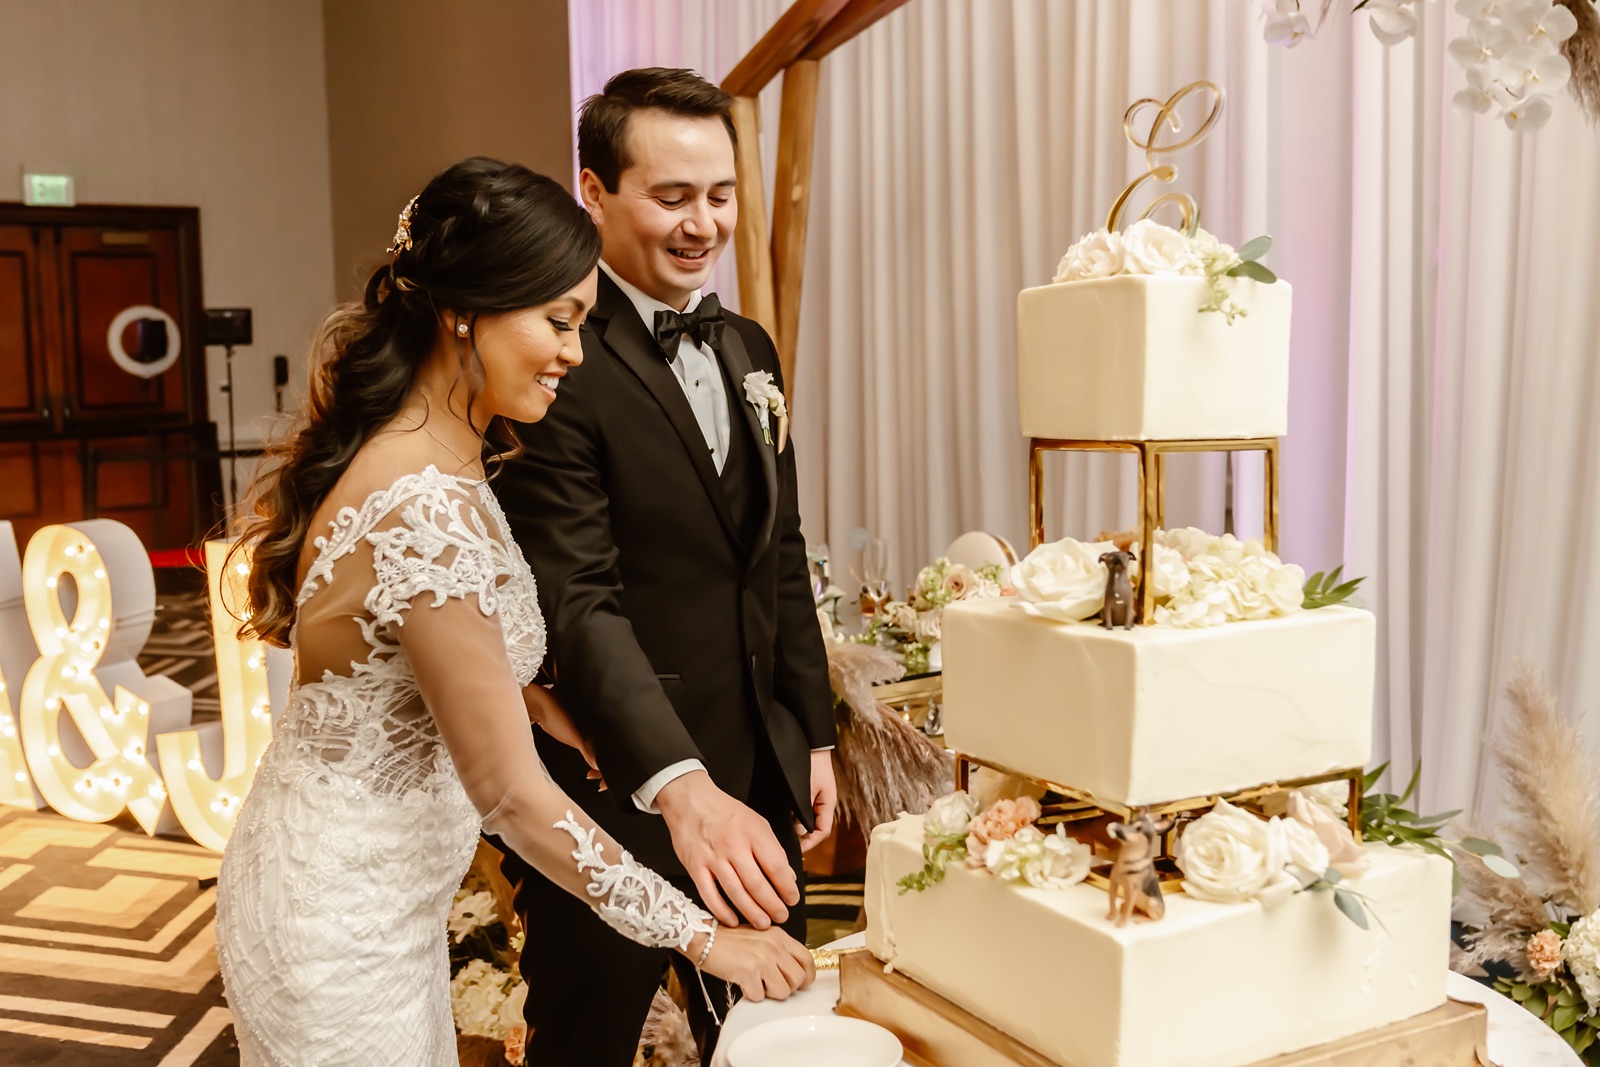 Bride and groom cut their wedding cake at their Everline Resort and Spa wedding